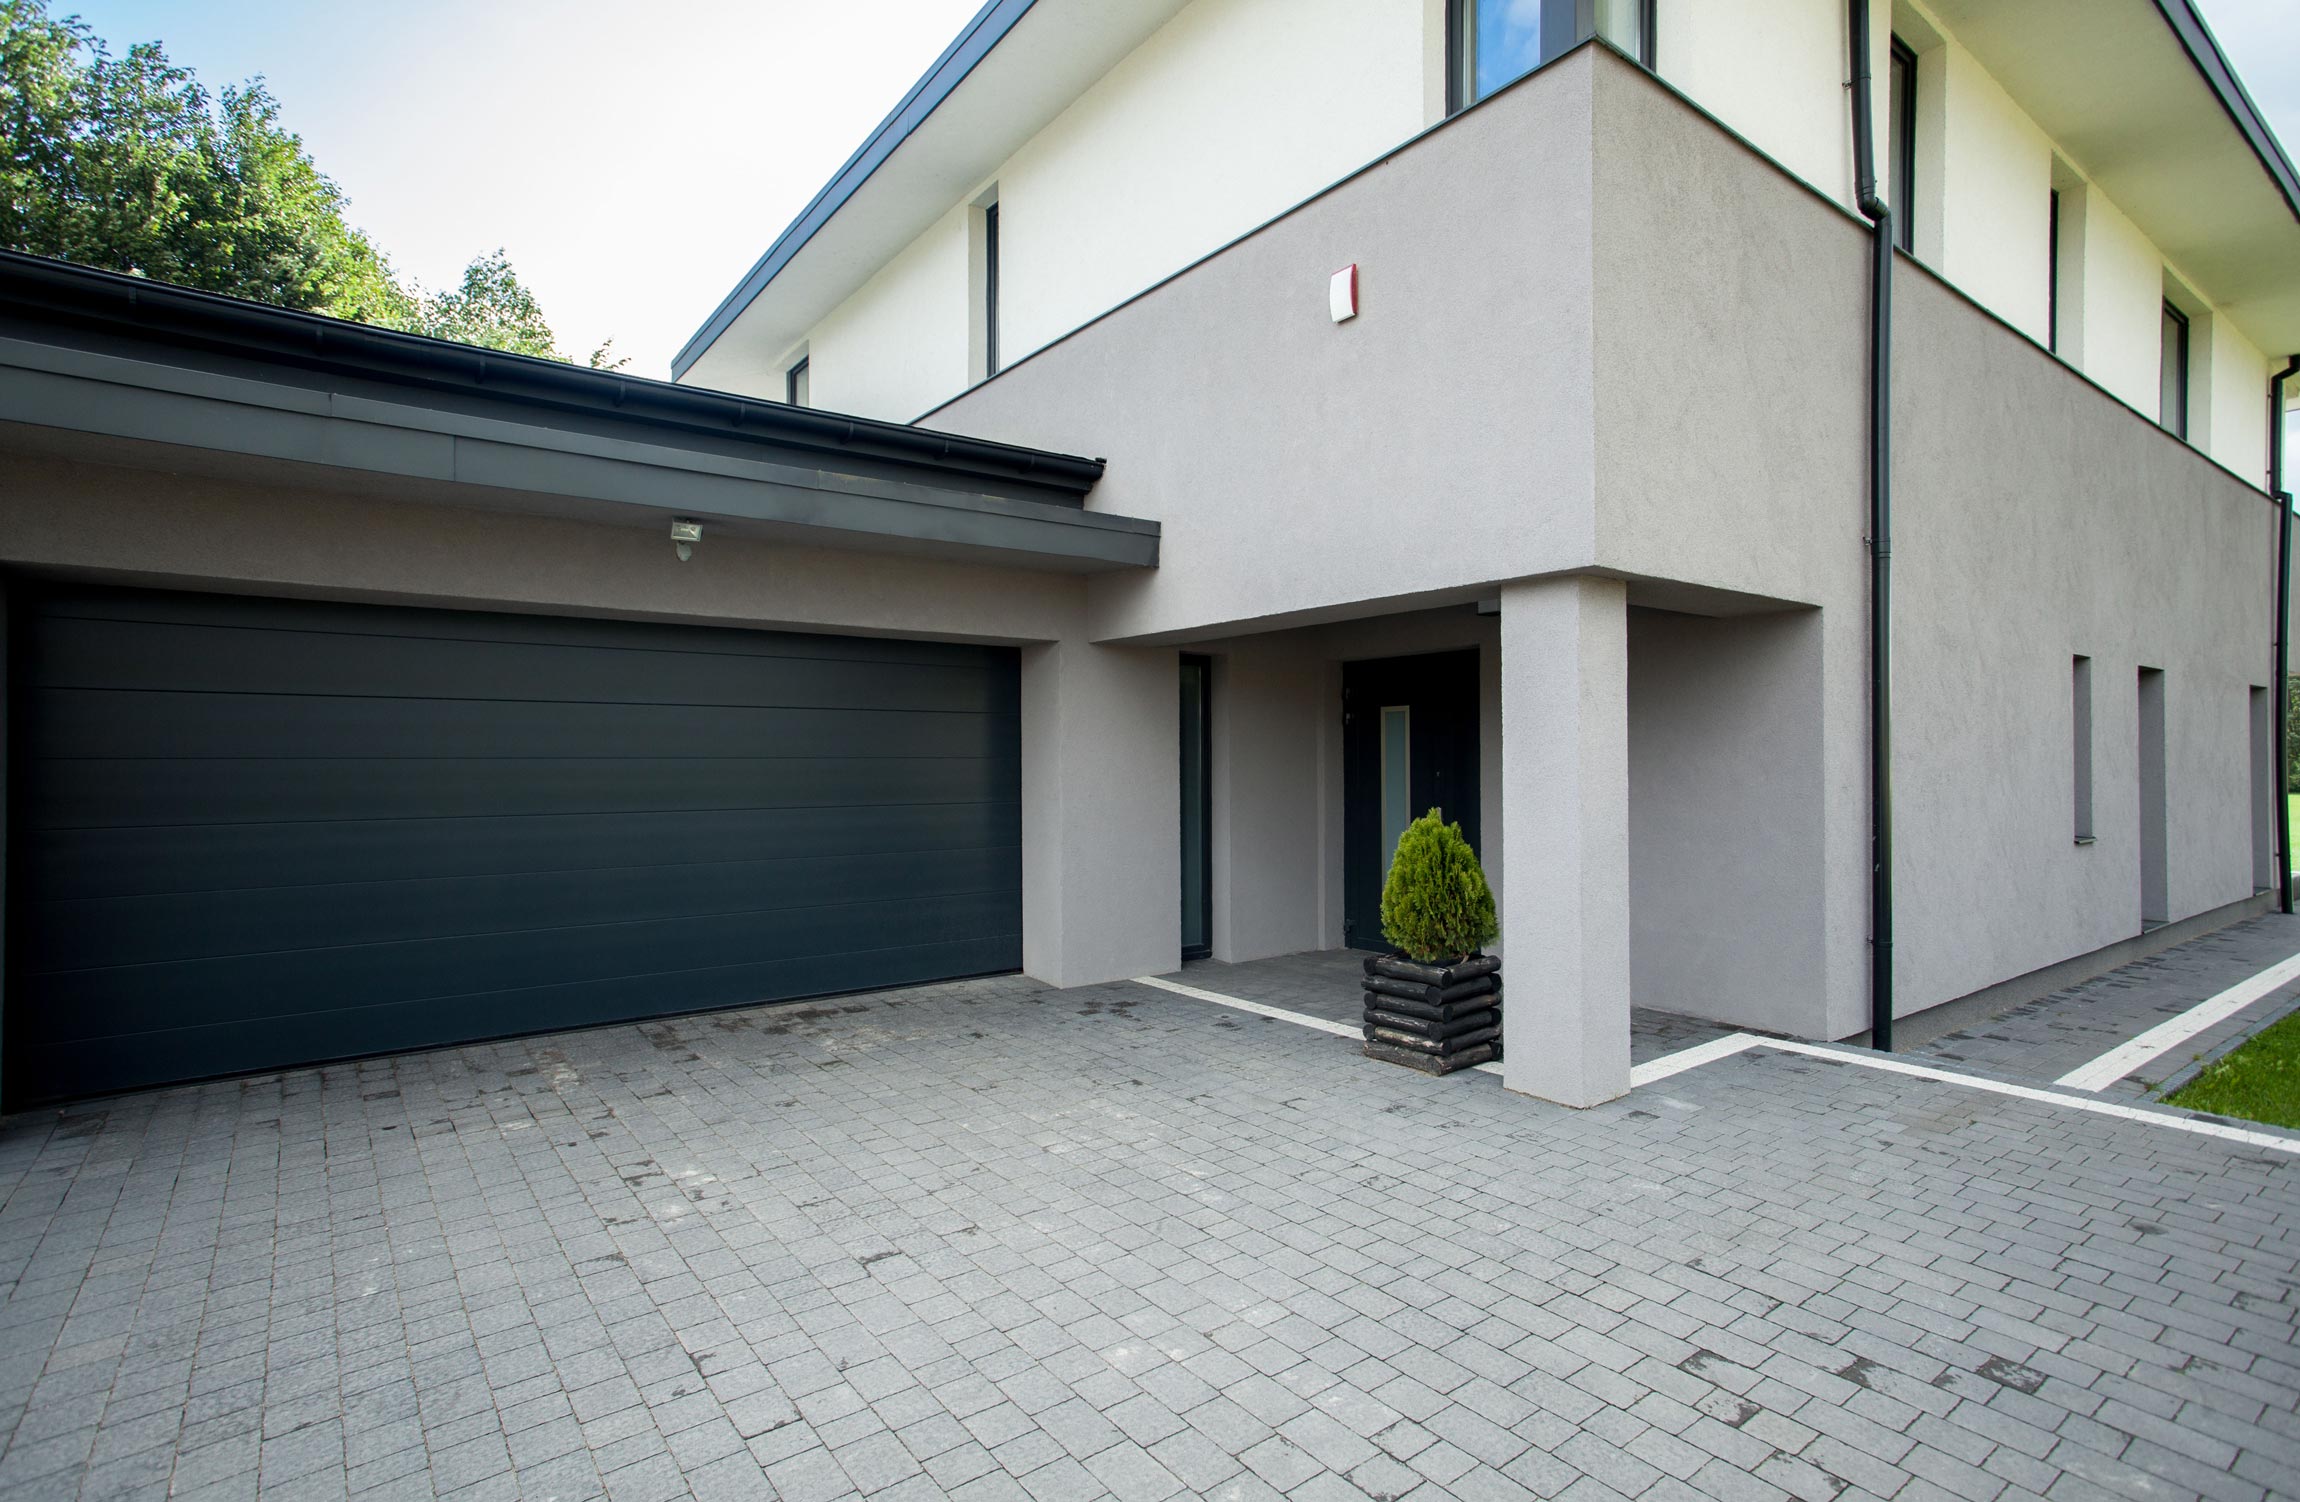 Sales, installation and repair of residential, commercial and industrial garage doors in Montreal, Laval and on the North Shore - Montreal Garage Doors - Portes de Garage Supérieur Inc. Montreal